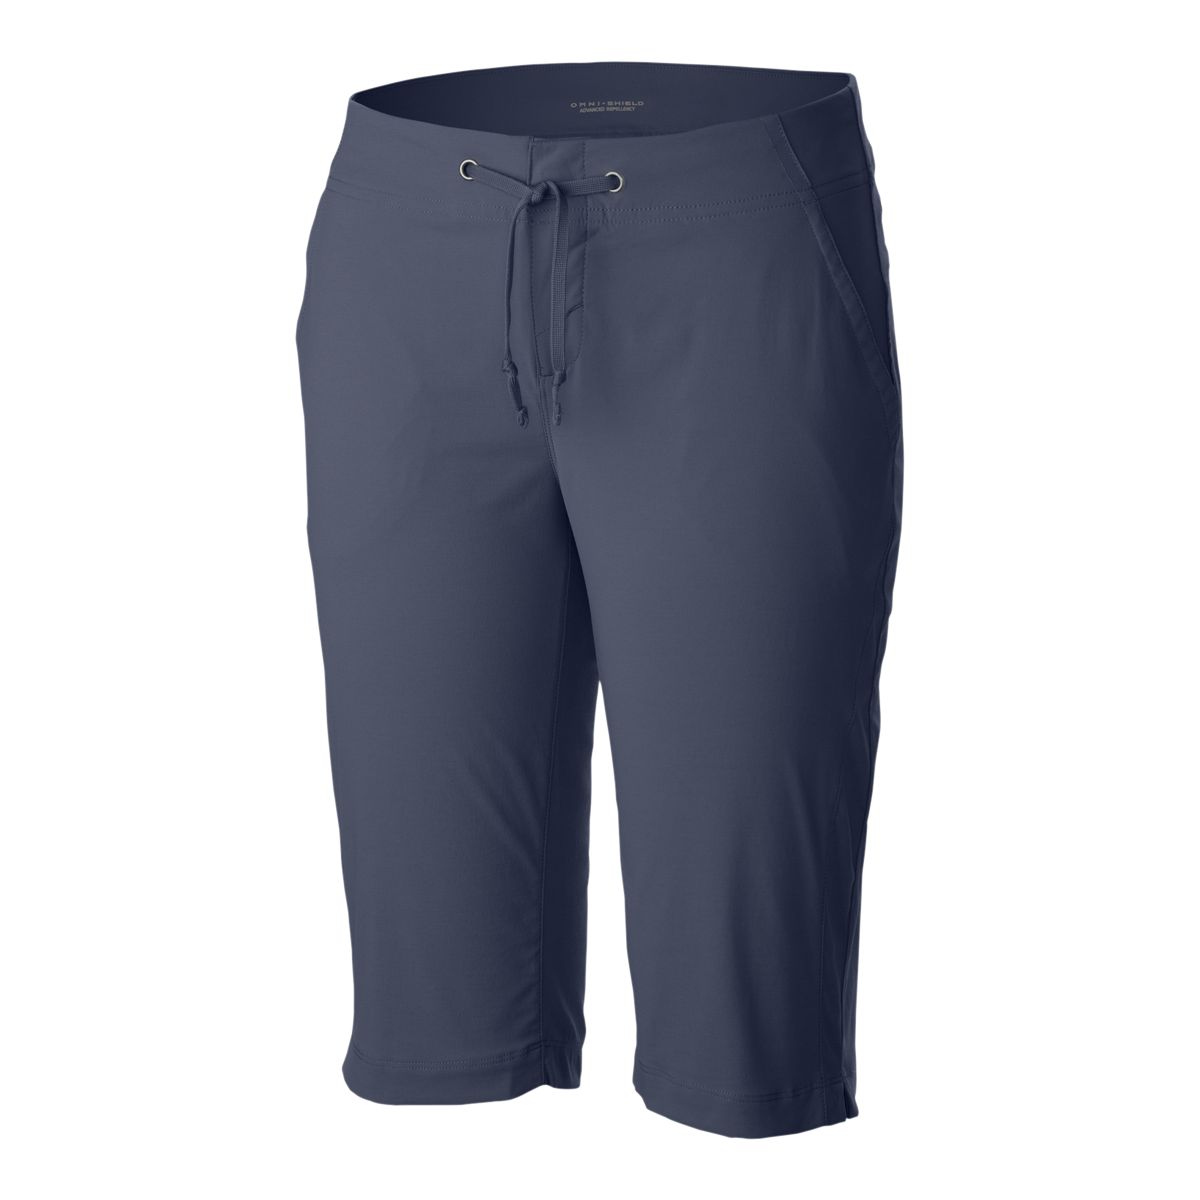 Columbia Women's Anytime Outdoor Omni-Shield Mid Rise Shorts